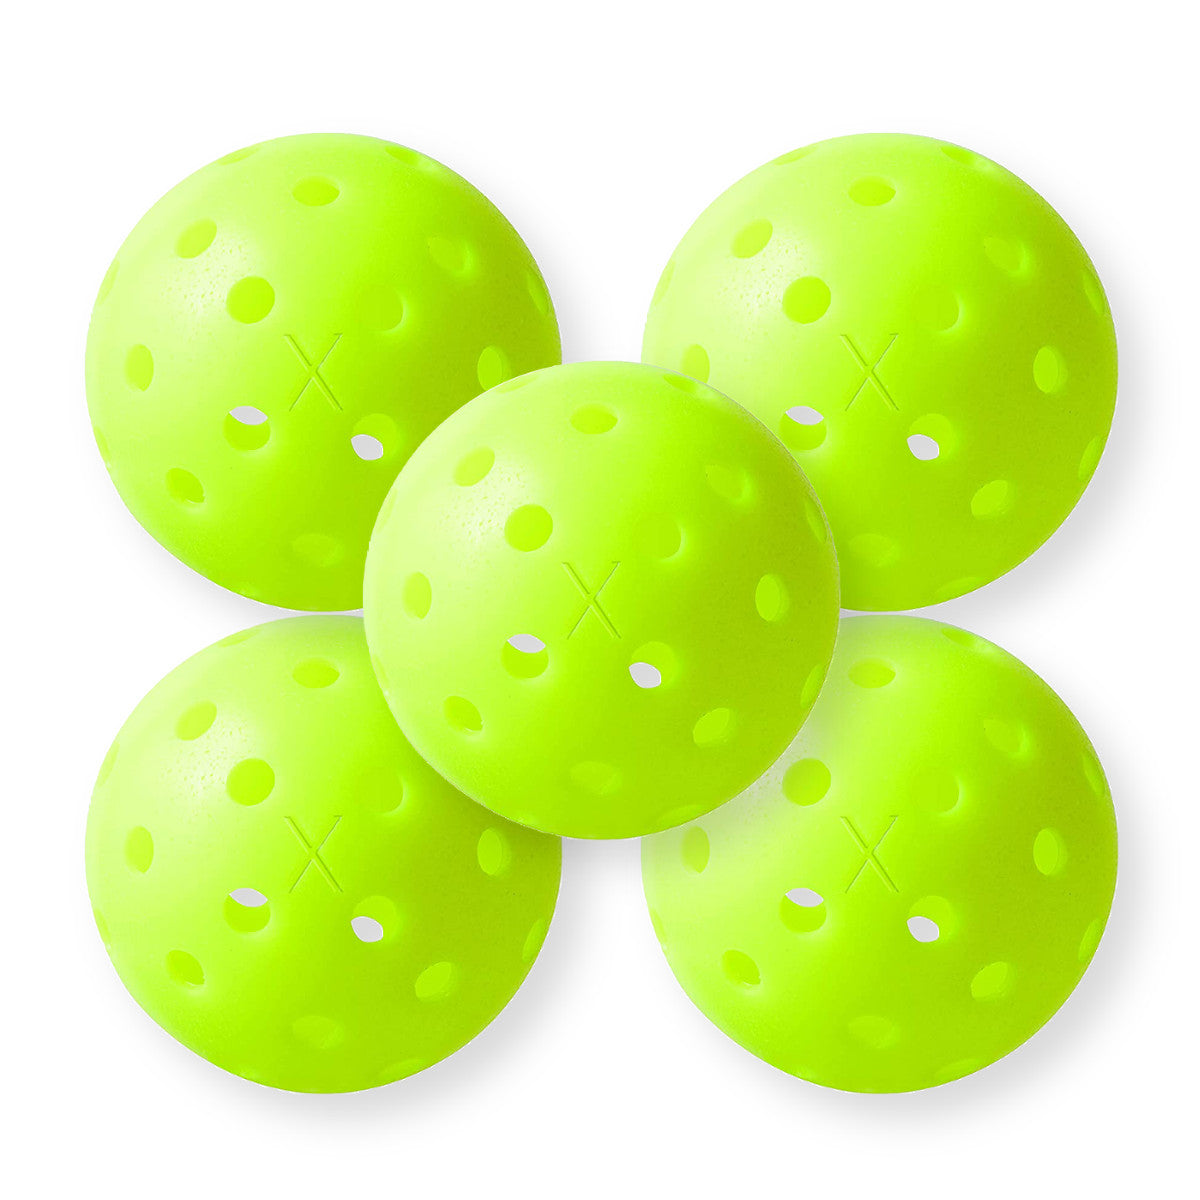 Six Franklin X-40 Outdoor Pickleball Balls with holes on them.